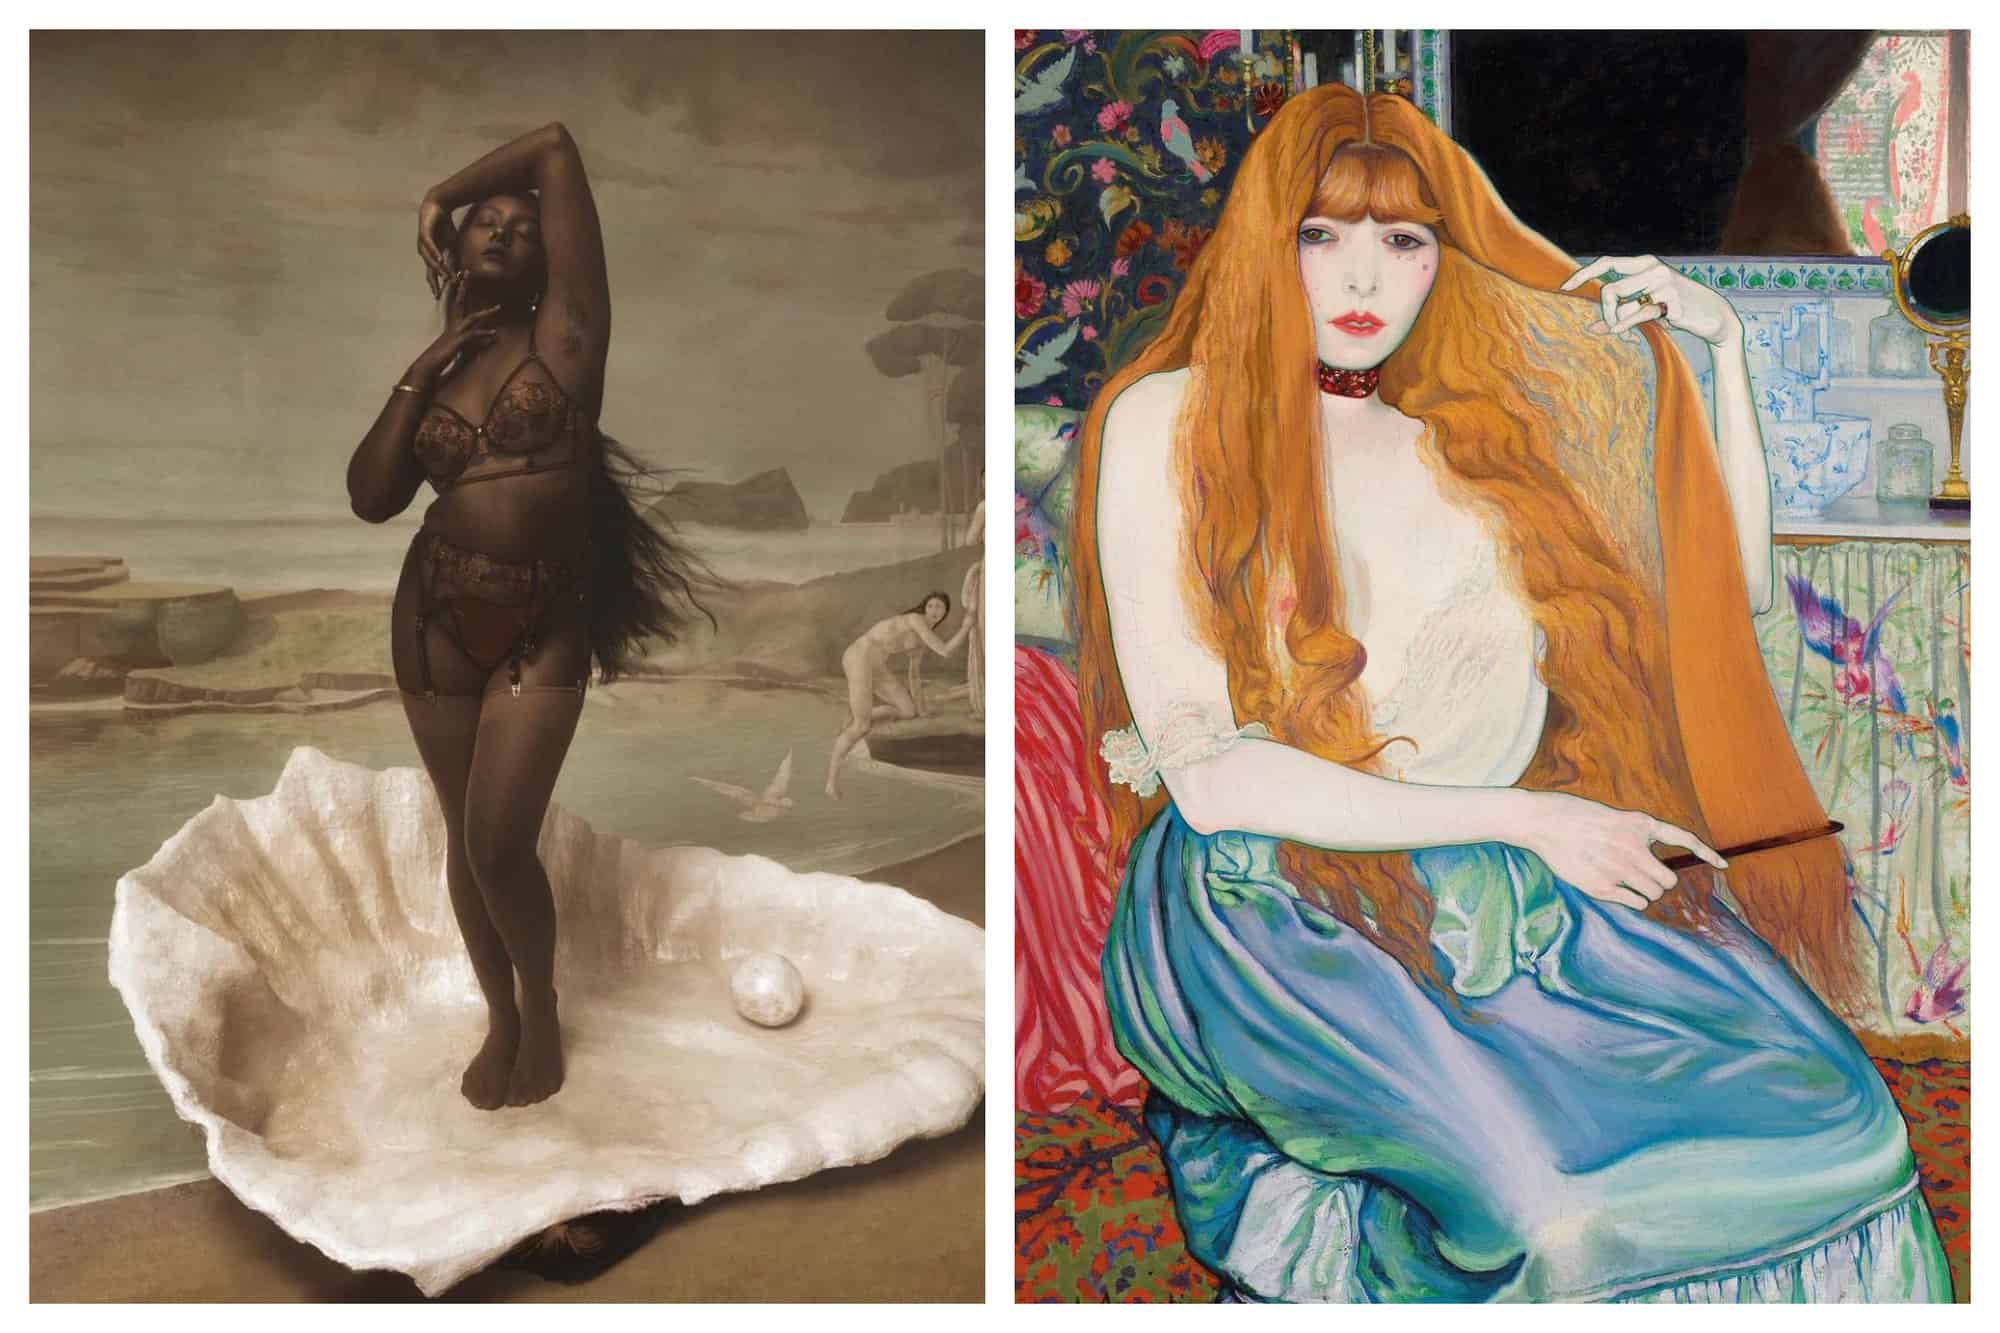 Left: A recreation of the painting 'Birth of Venus' by Botticelli. Right: A painting of a woman combing her long red hair. She is wearing a white top and a blue skirt.